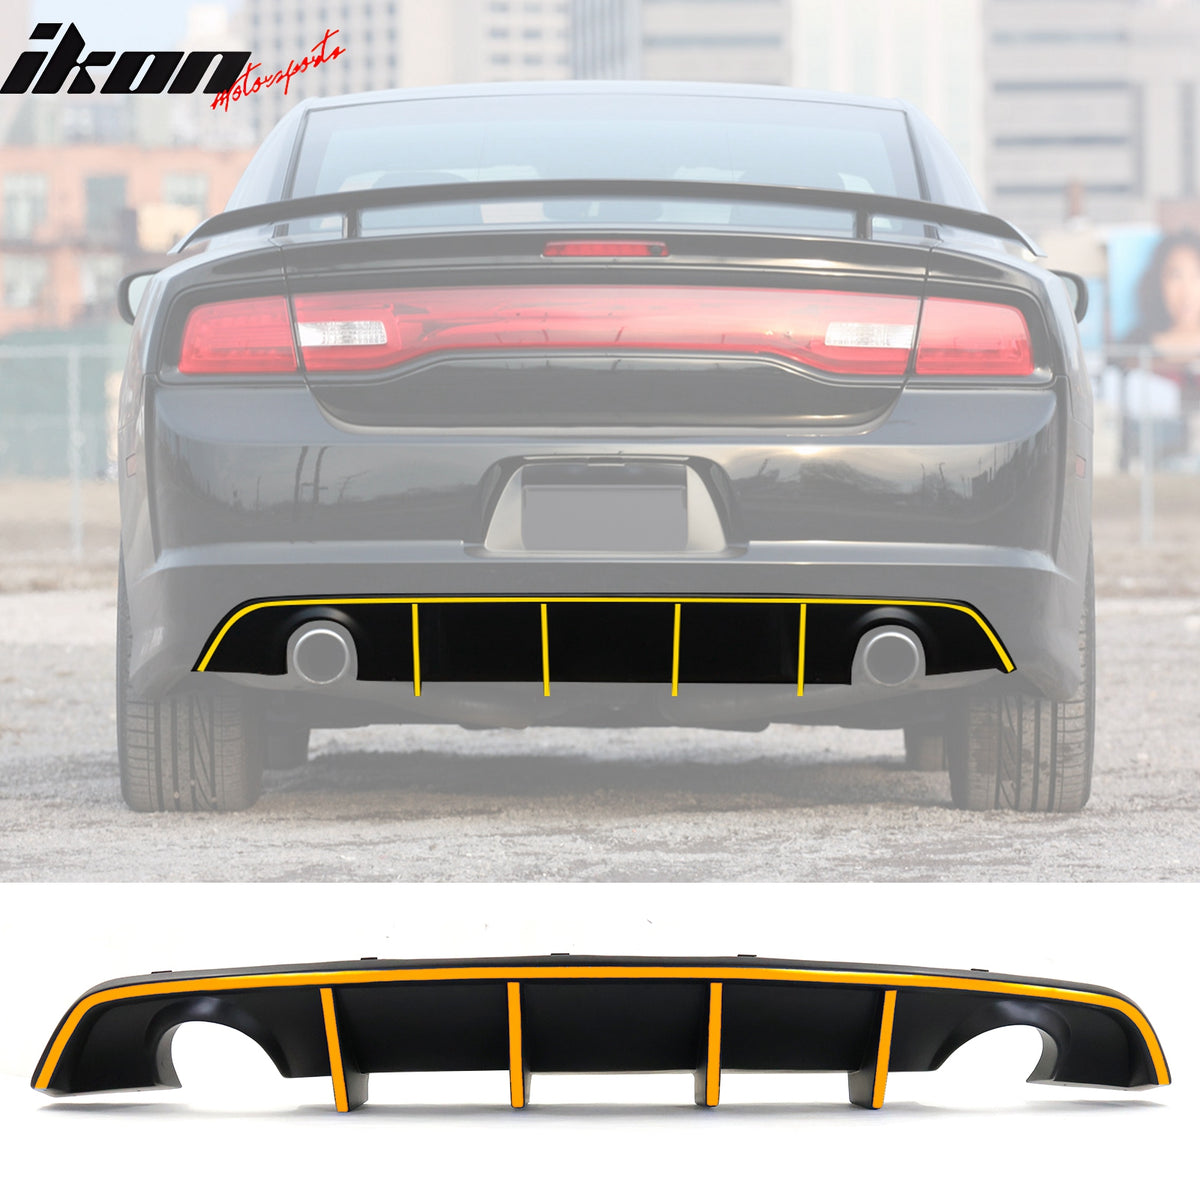 IKON MOTORSPORTS, Rear Diffuser w/ Reflective Tape Compatible With 2012-2014 Dodge Charger SRT8, V2 Style PP Splitter Spoiler Valance Chin Bumper Lip Bodykit with Safety Tape, 2013